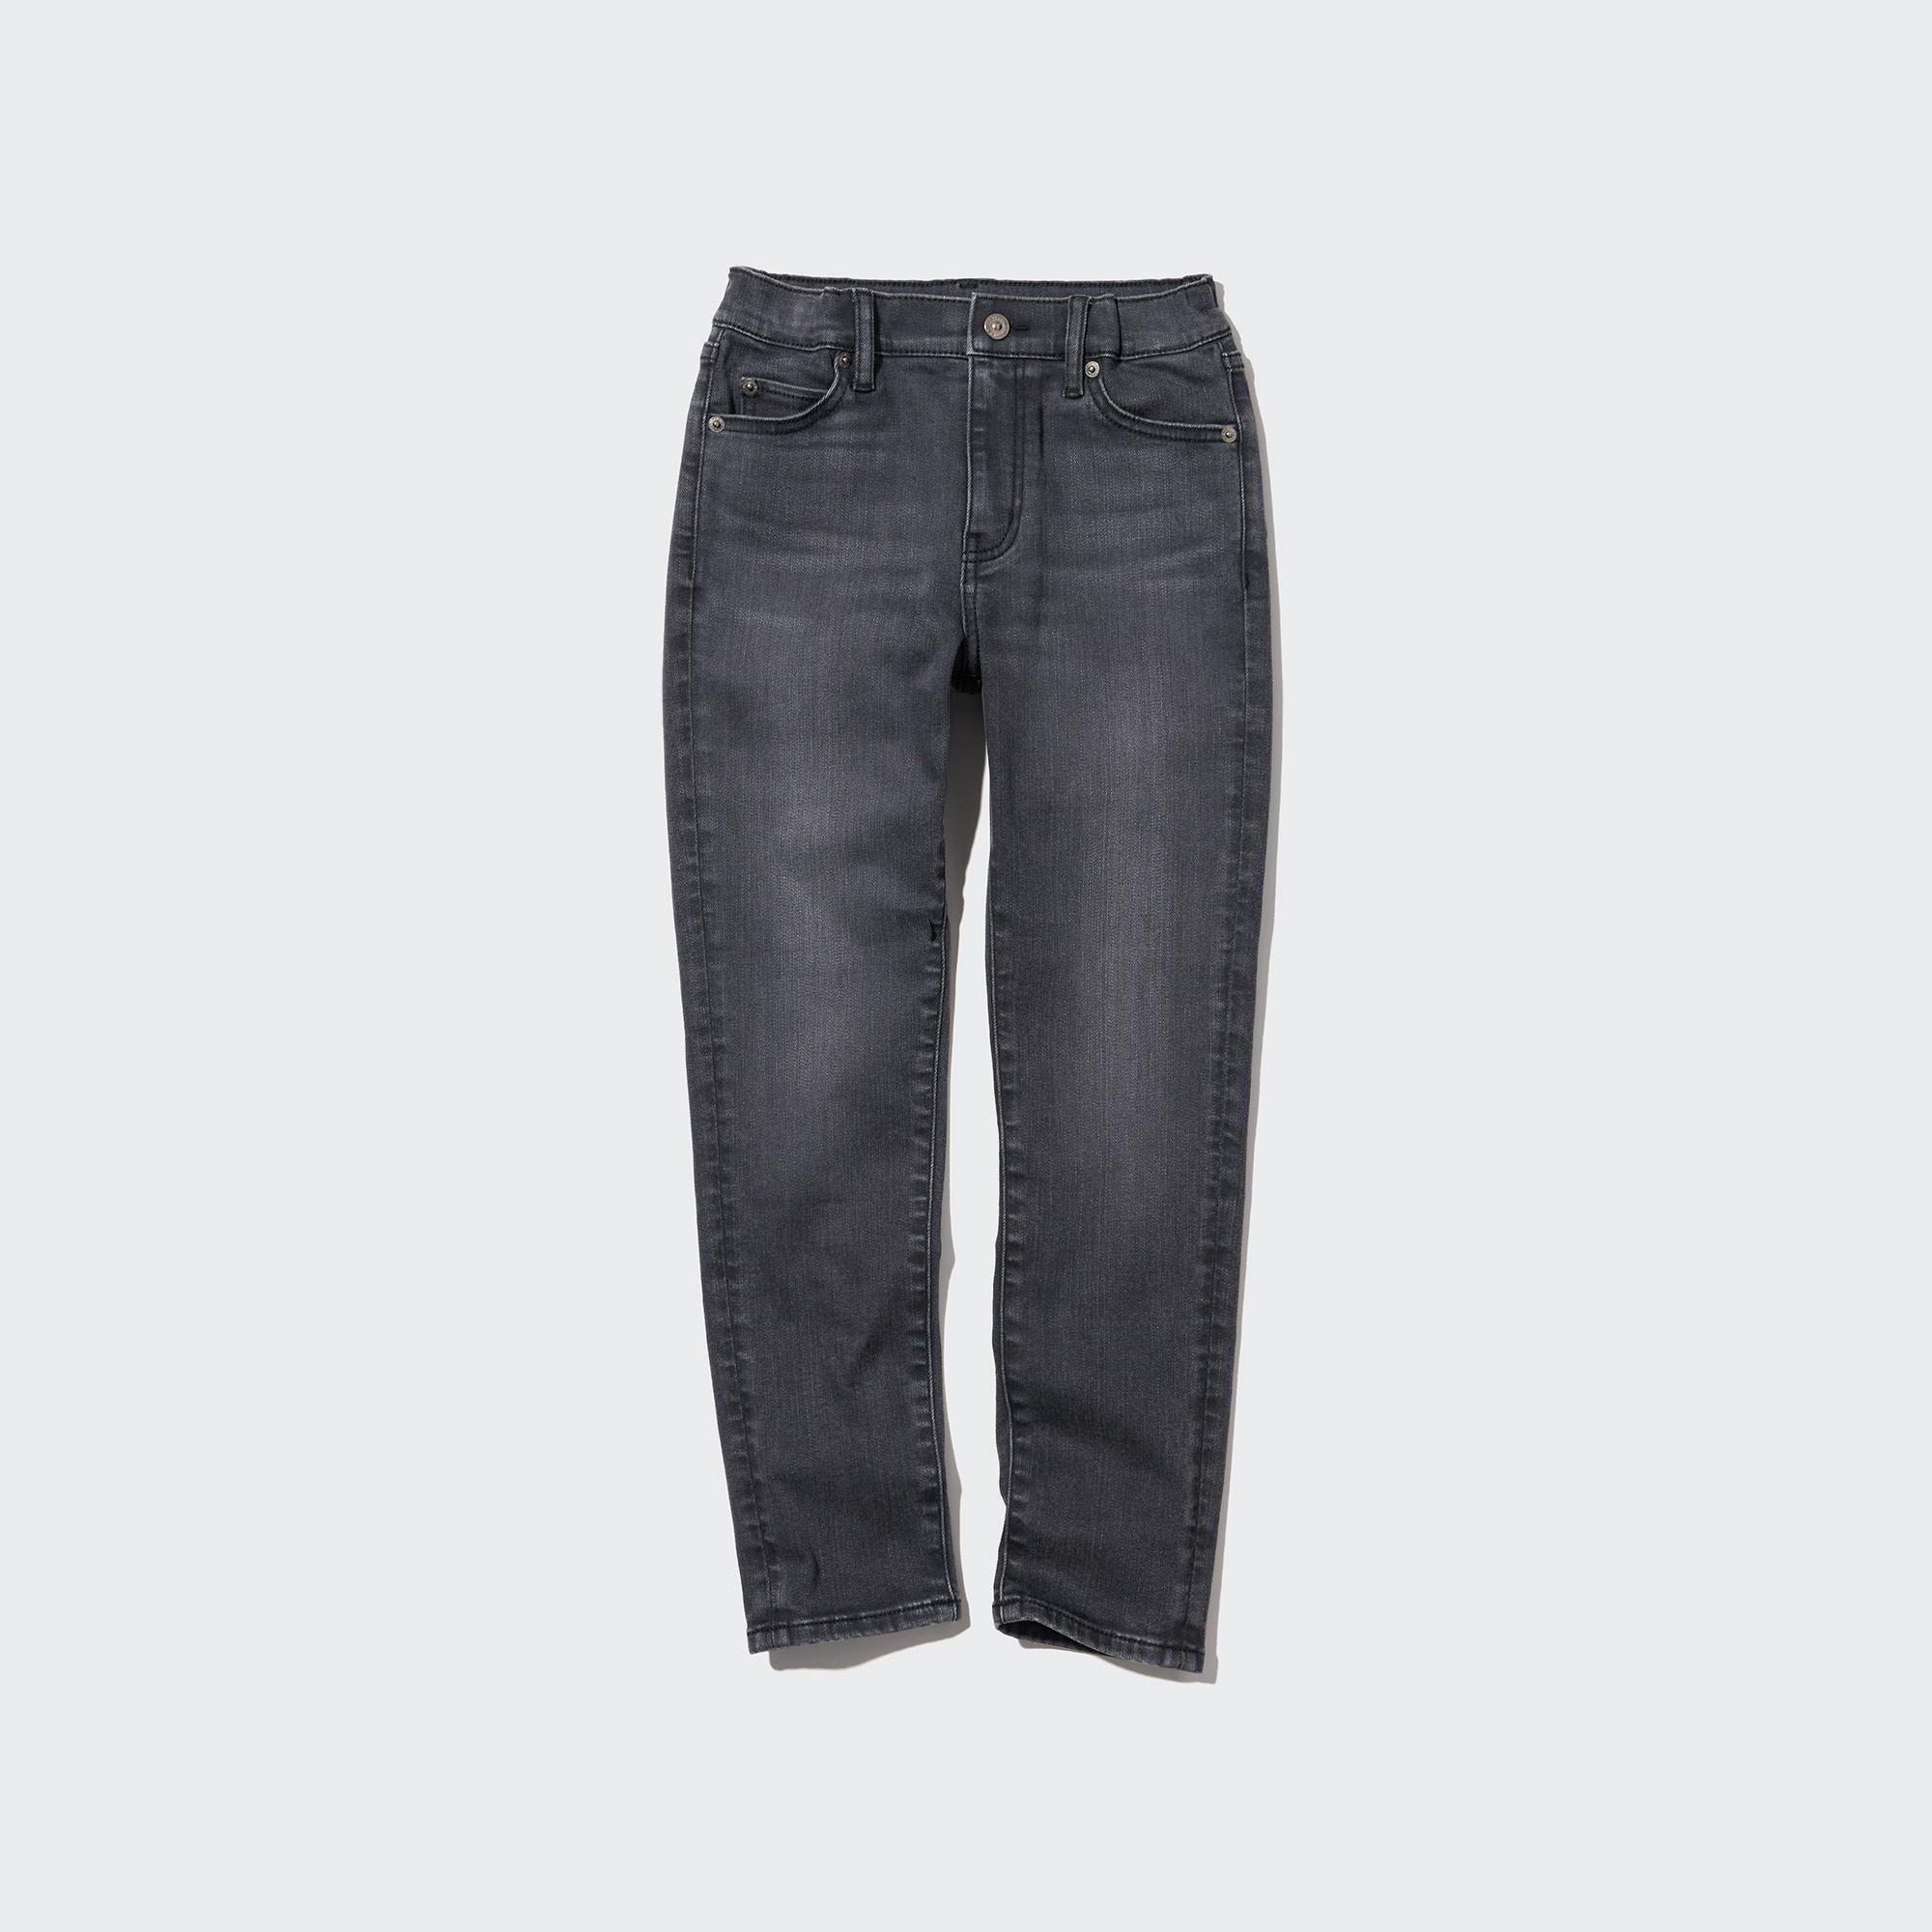 Ultra Stretch Soft Jeans by UNIQLO